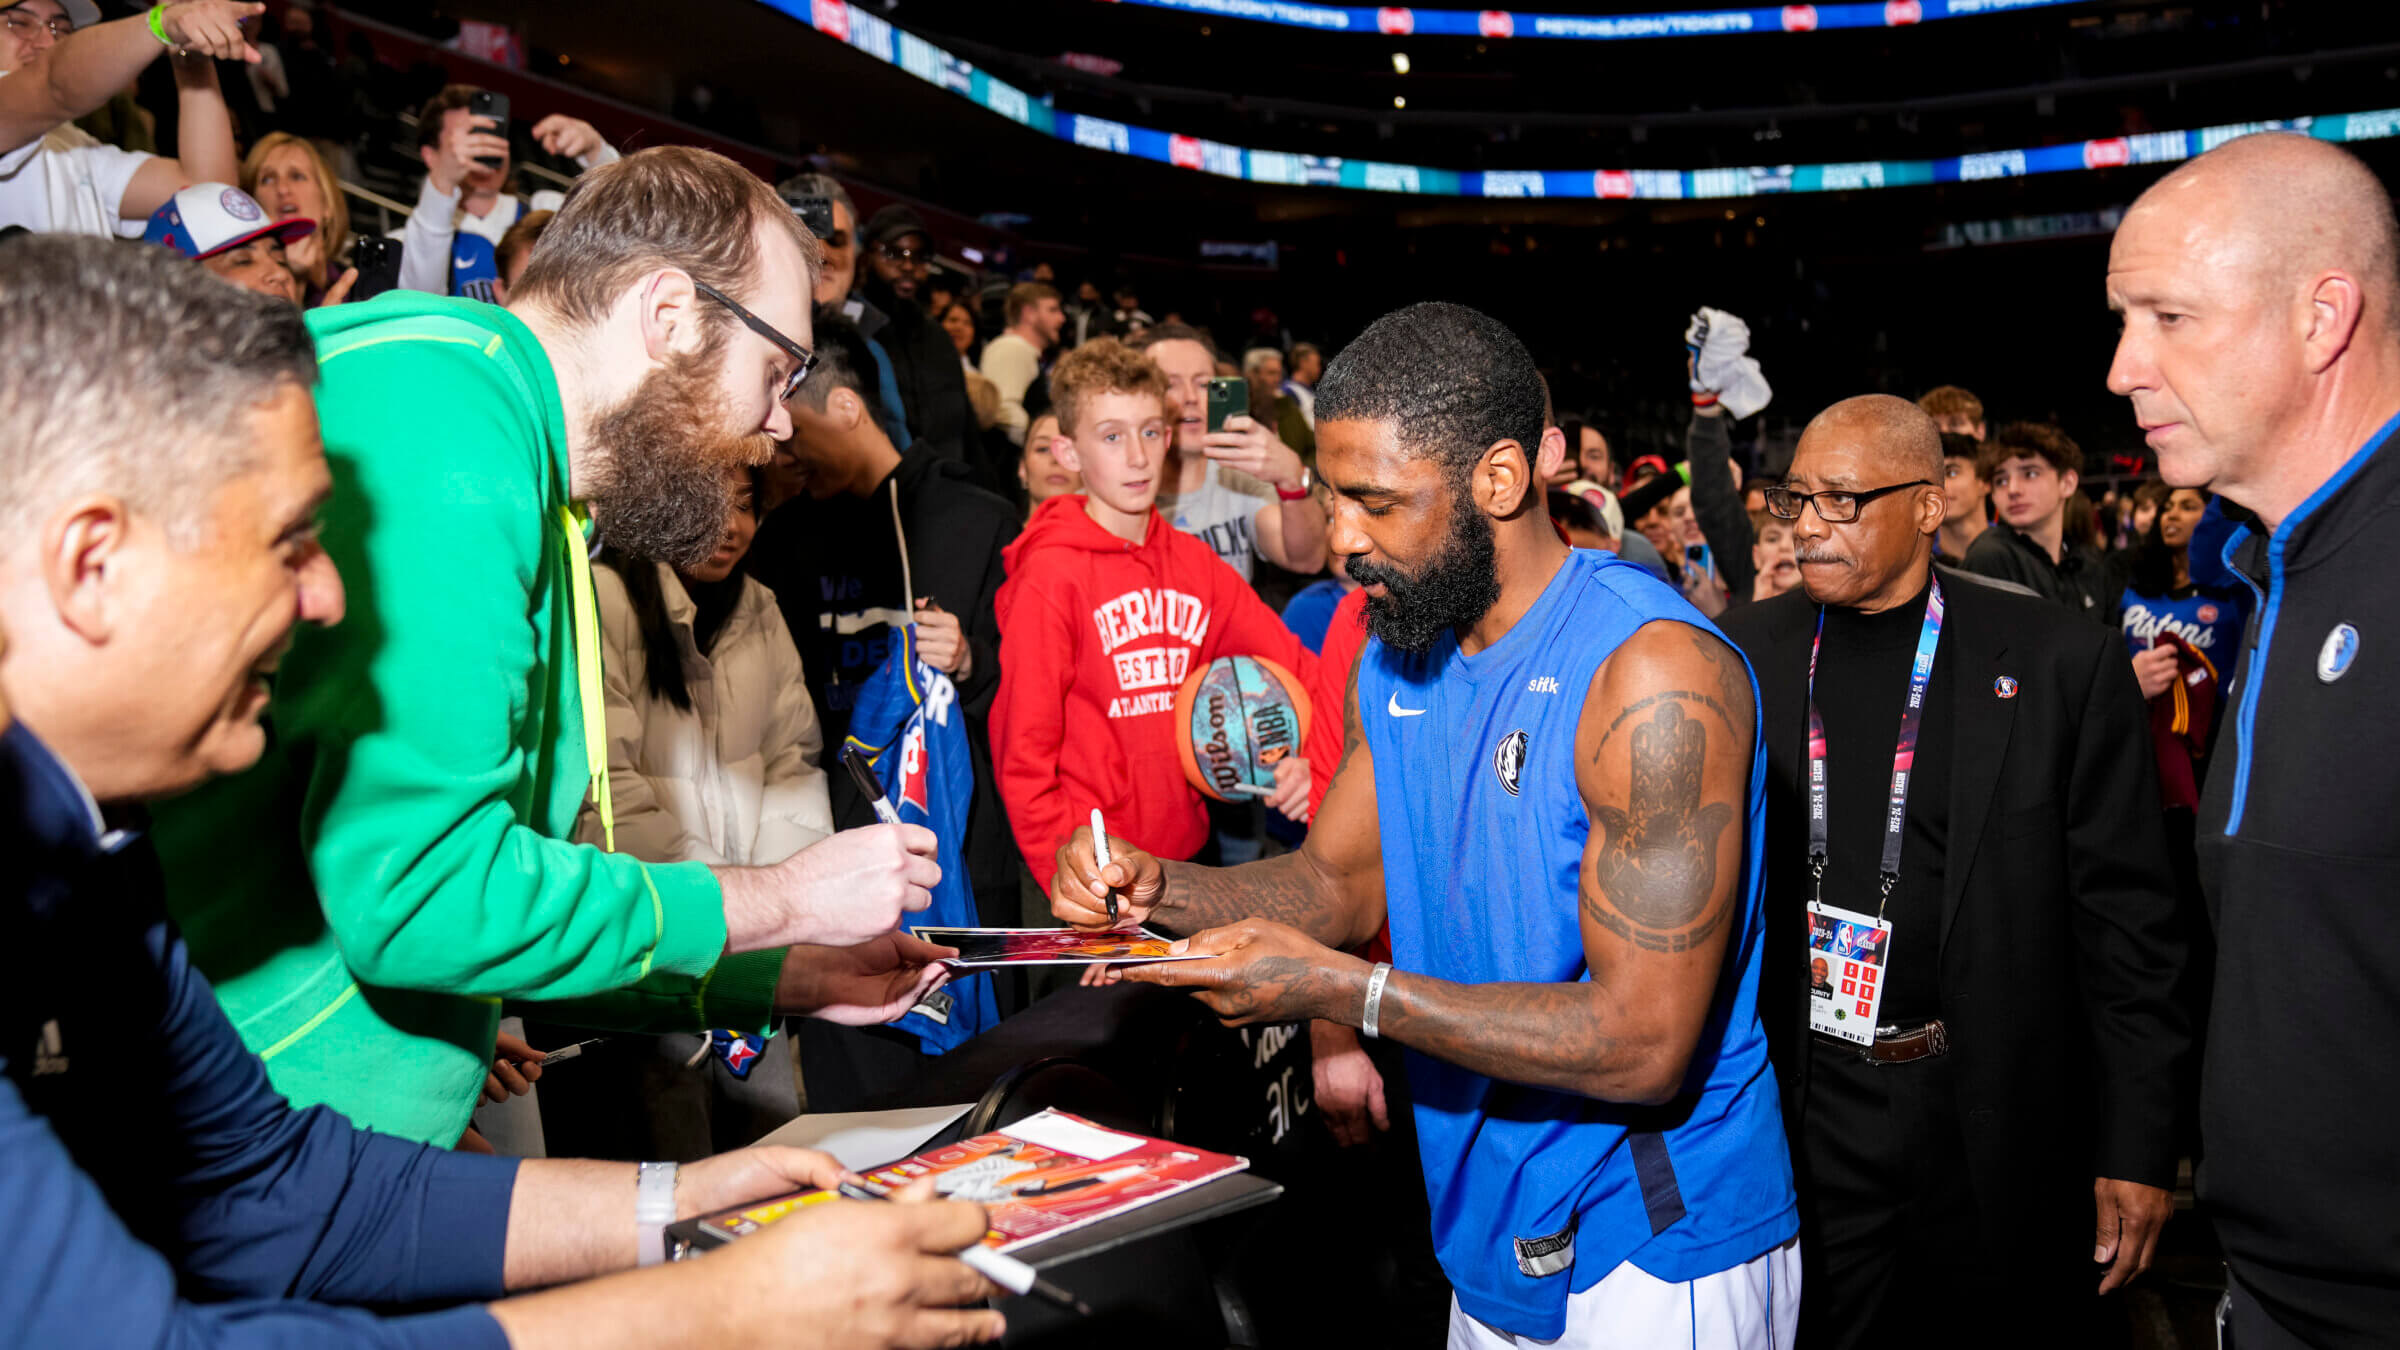 Kyrie Irving signs autographs for fans following a game this spring. The basketball star’s promotion of a documentary that described the Holocaust as a lie seems to have faded from memory.